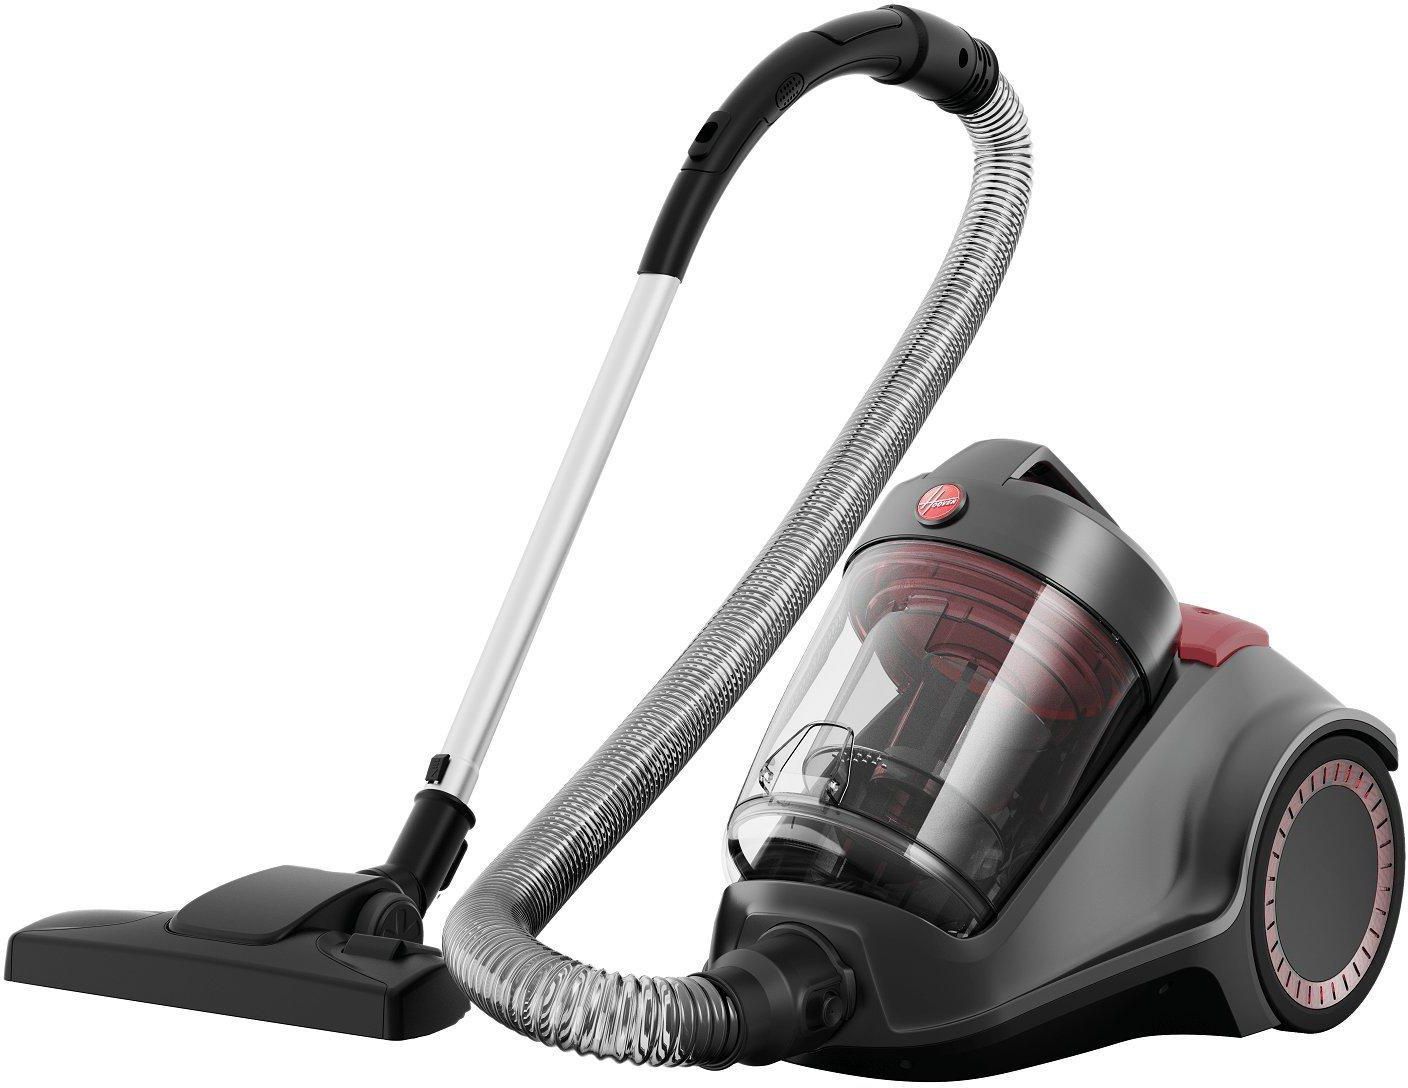 Hoover Power Vacuum Cleaner, 3 Lts , 2200 Watts, Grey & Red